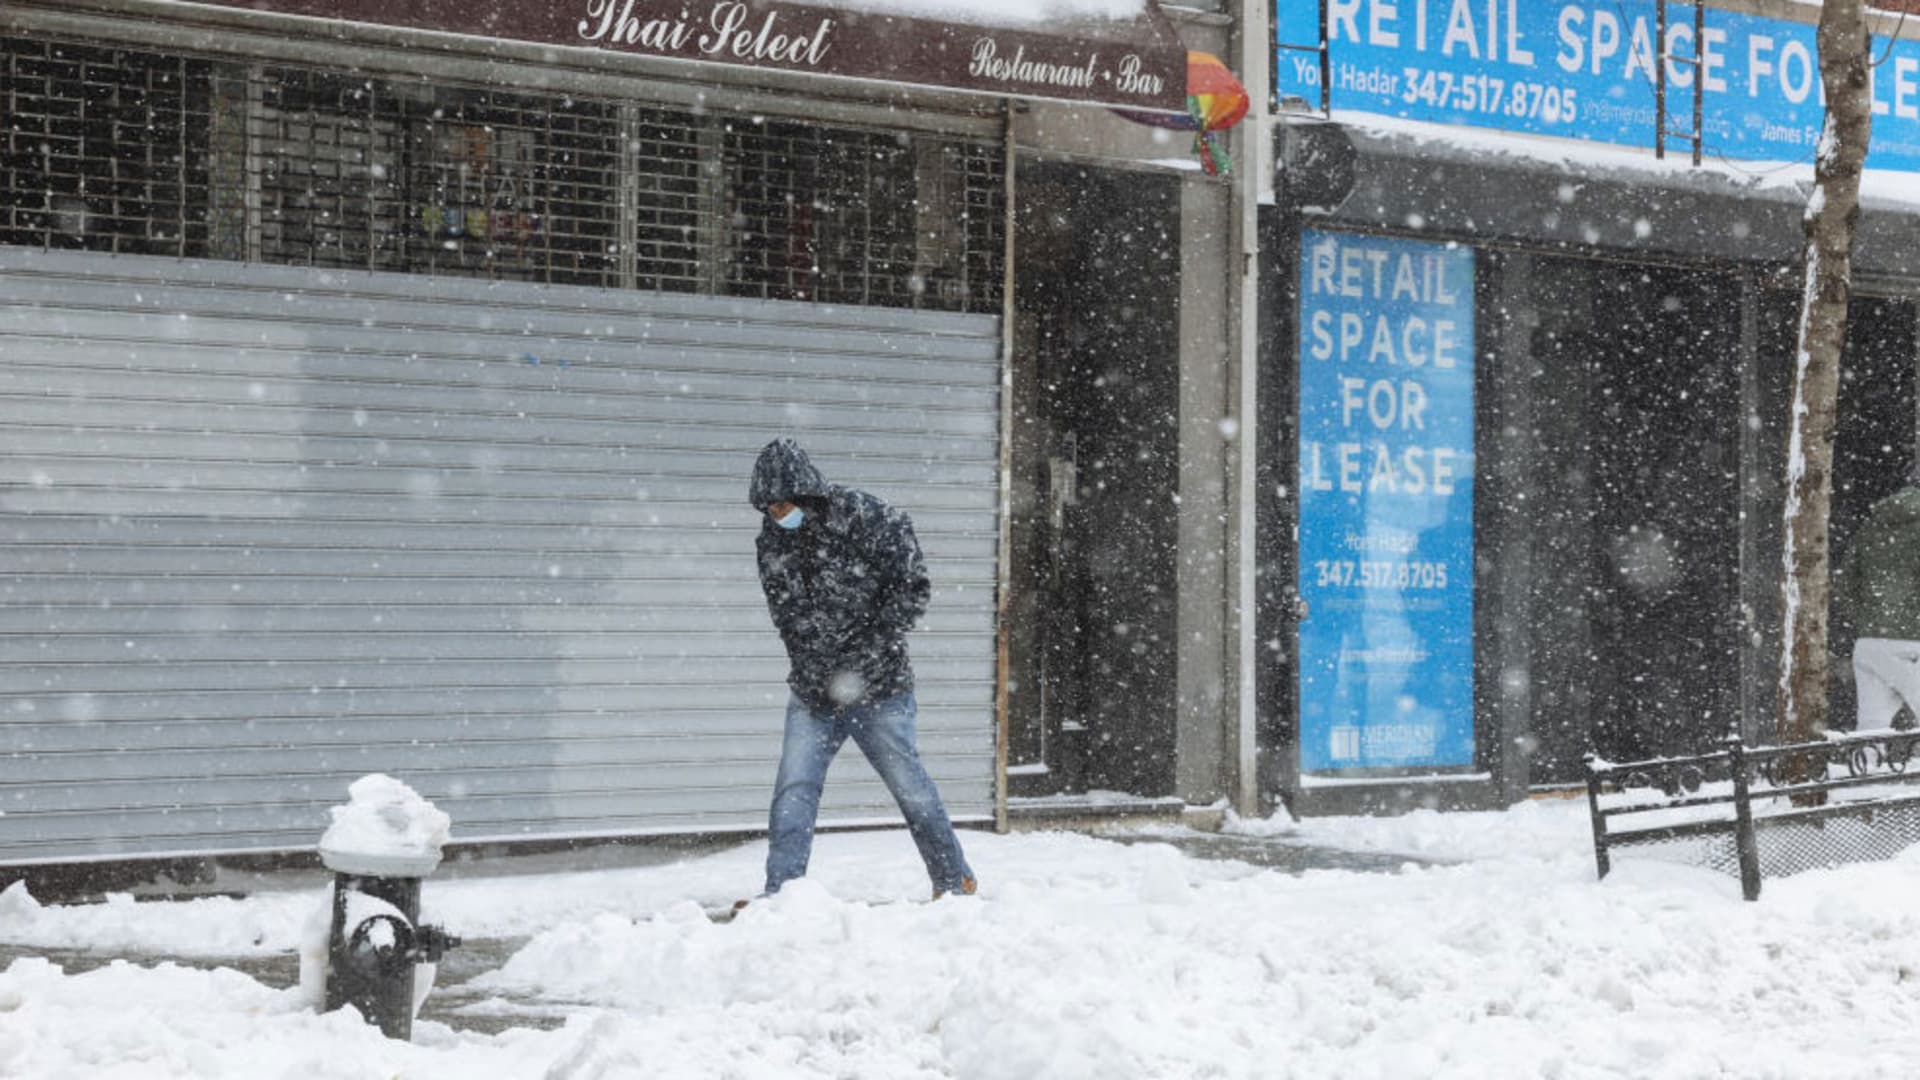 A pedestrian wearing a protective mask walks past a closed restaurant as snow falls in New York, on Thursday, Dec. 17, 2020.